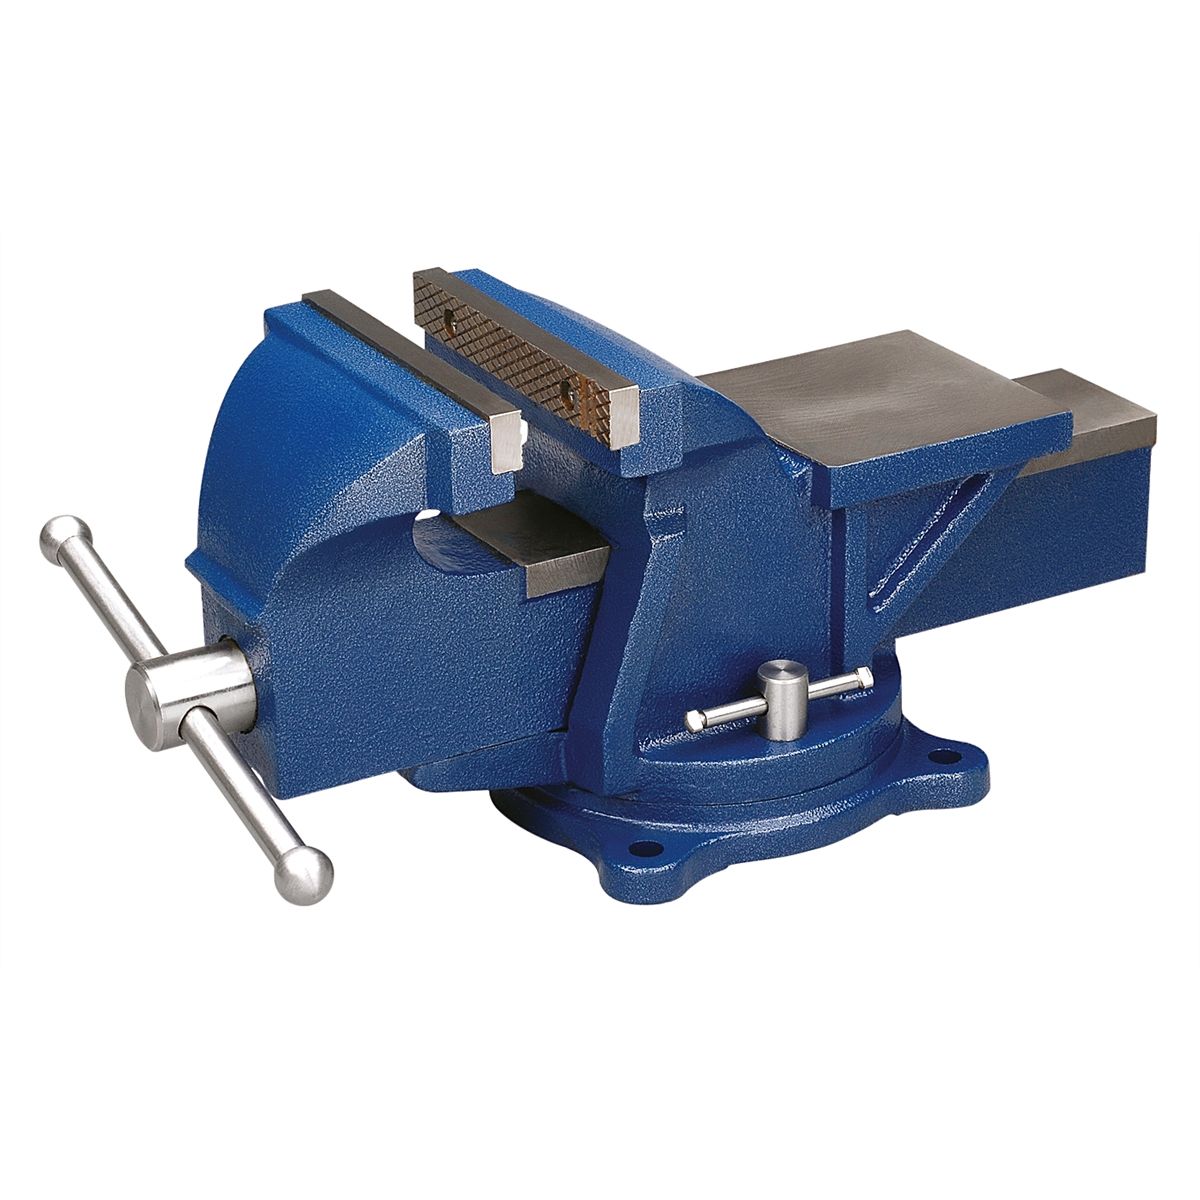 WILTON 5" Jaw Bench Vise with Swivel Base